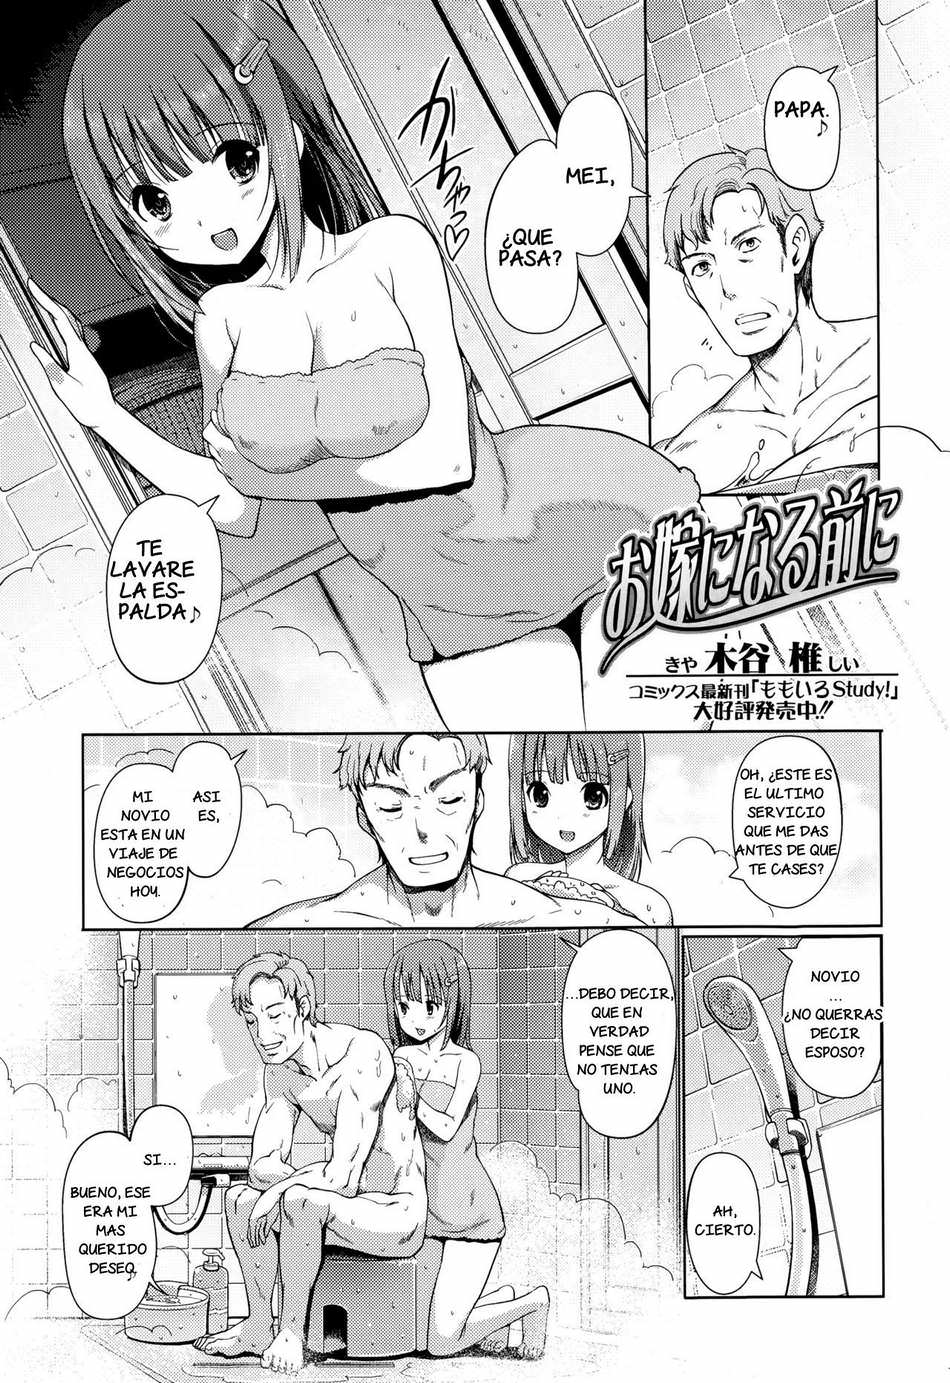 Before becoming a bride - Page #1